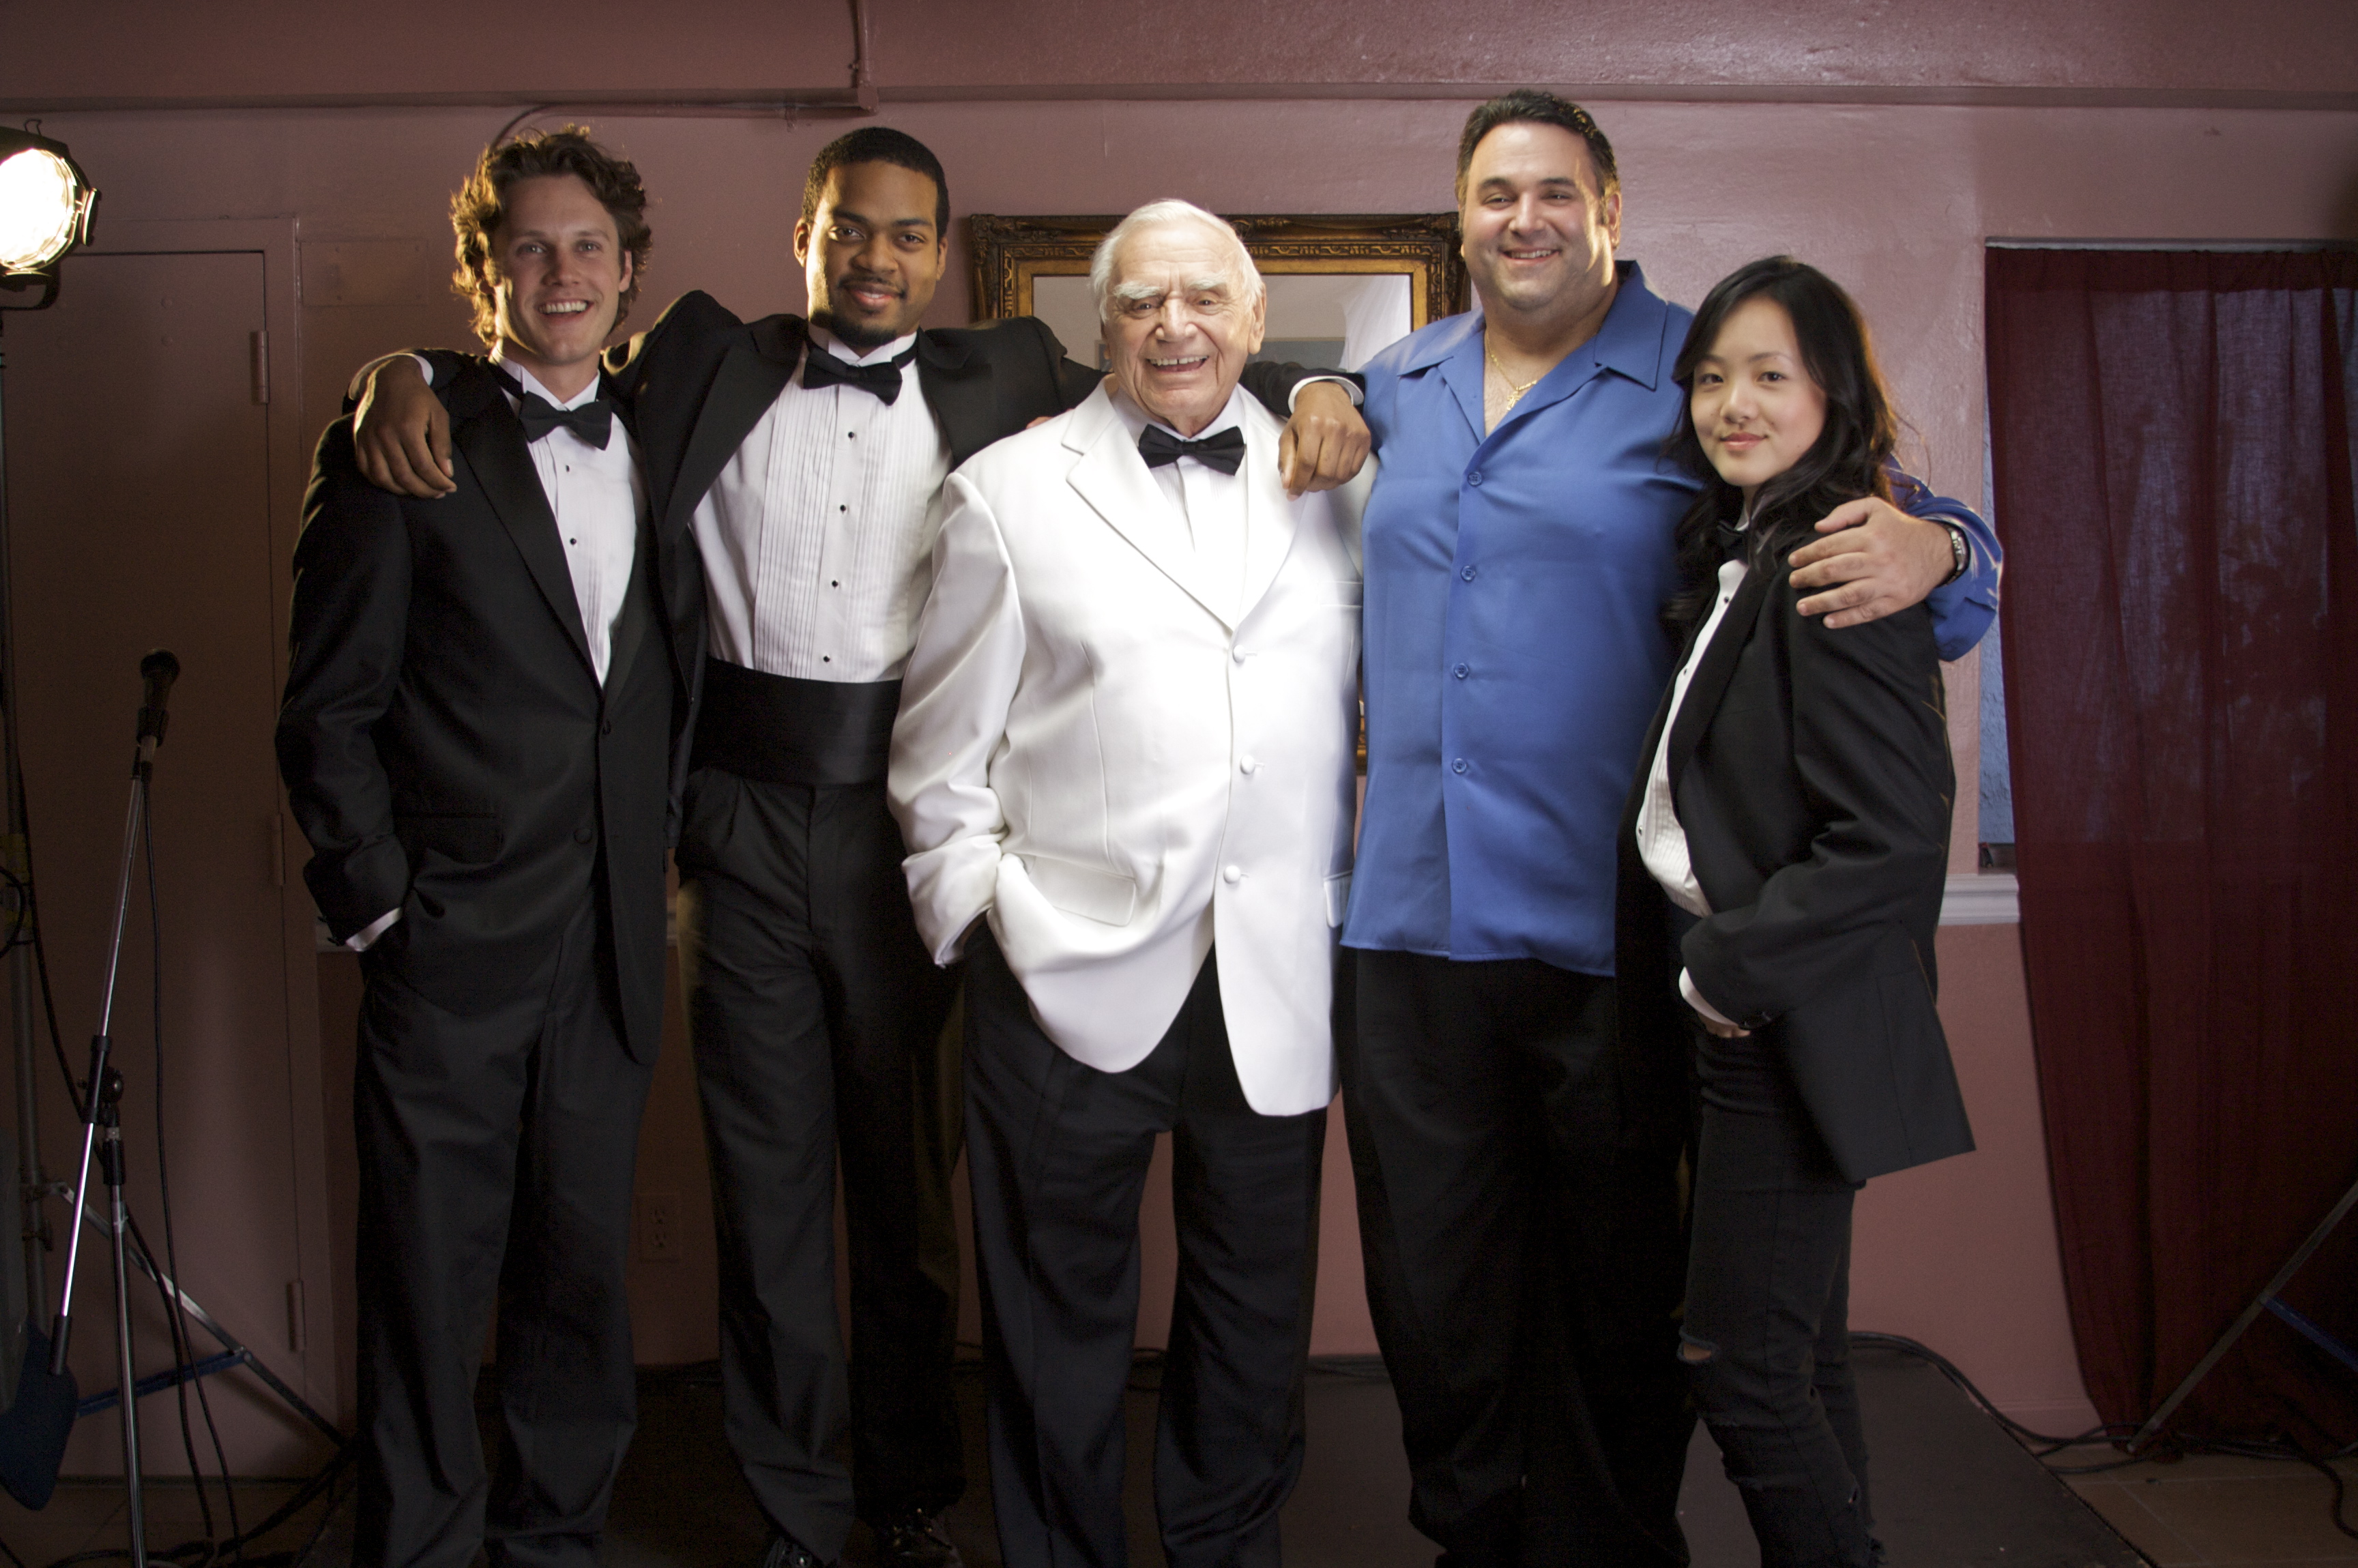 Director/Producer Sam Borowski (in blue) poses for a publicity shot with his cast from NIGHT CLUB (L to R), Zachary Abel, Bryan Williams, Academy Award Winner Ernest Borgnine and Ahney Her (GRAN TORINO).